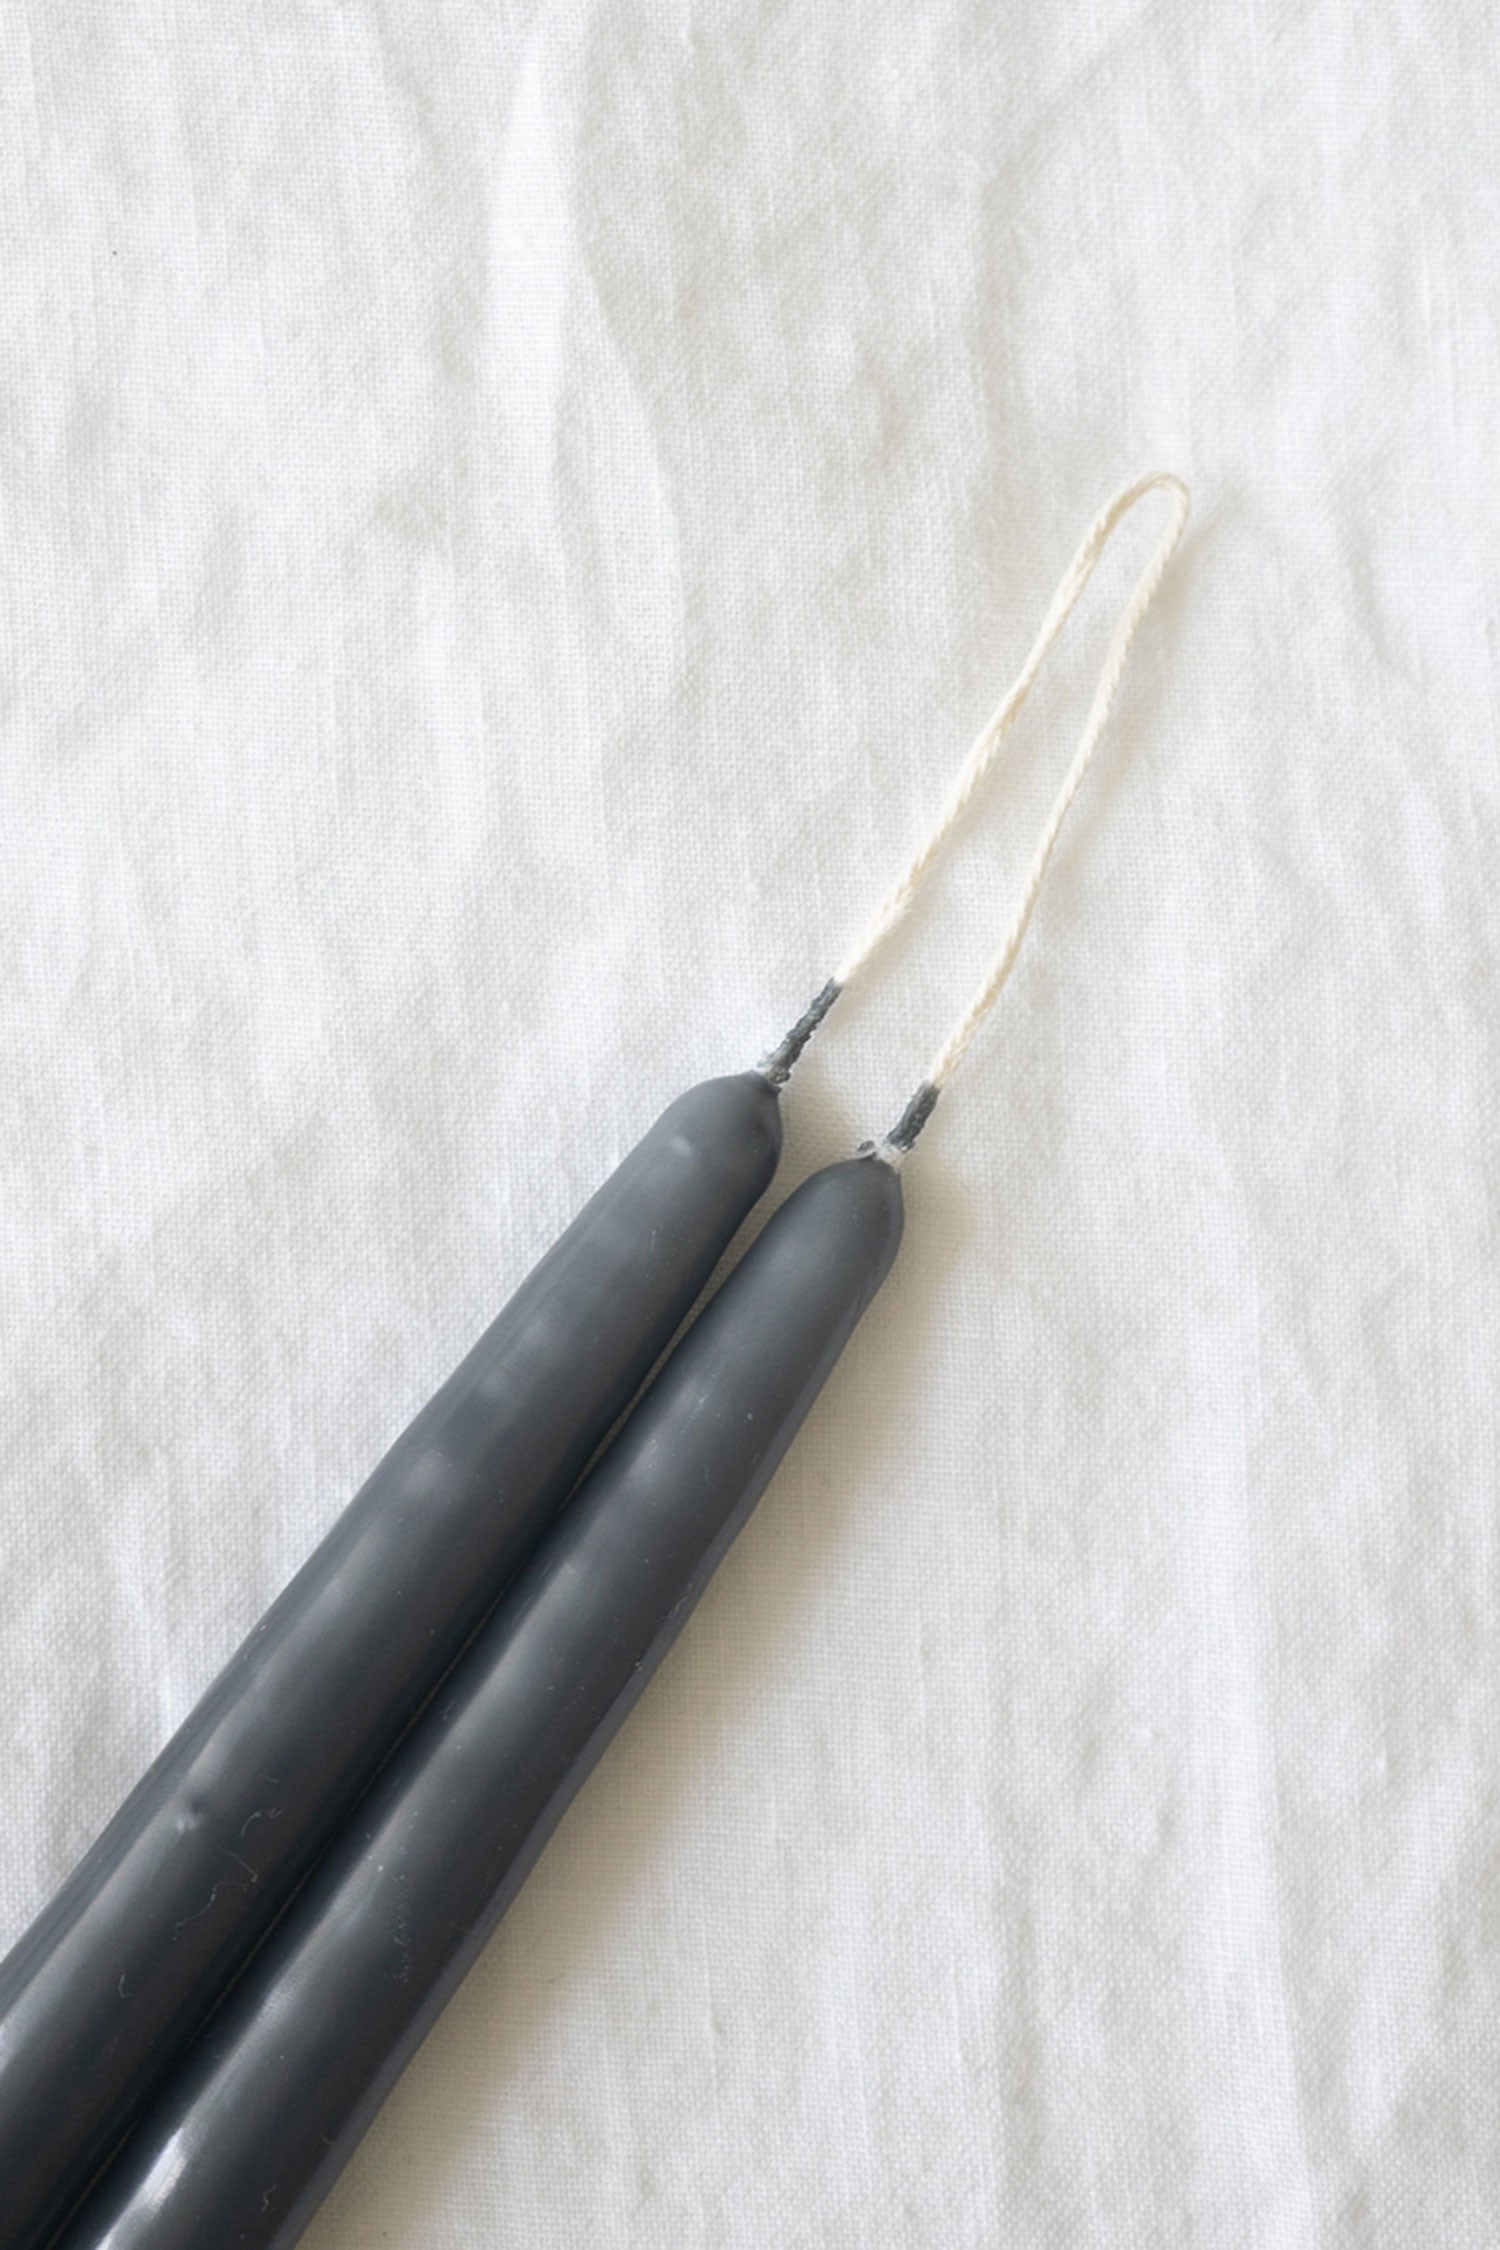 Taper Candles Pair Charcoal